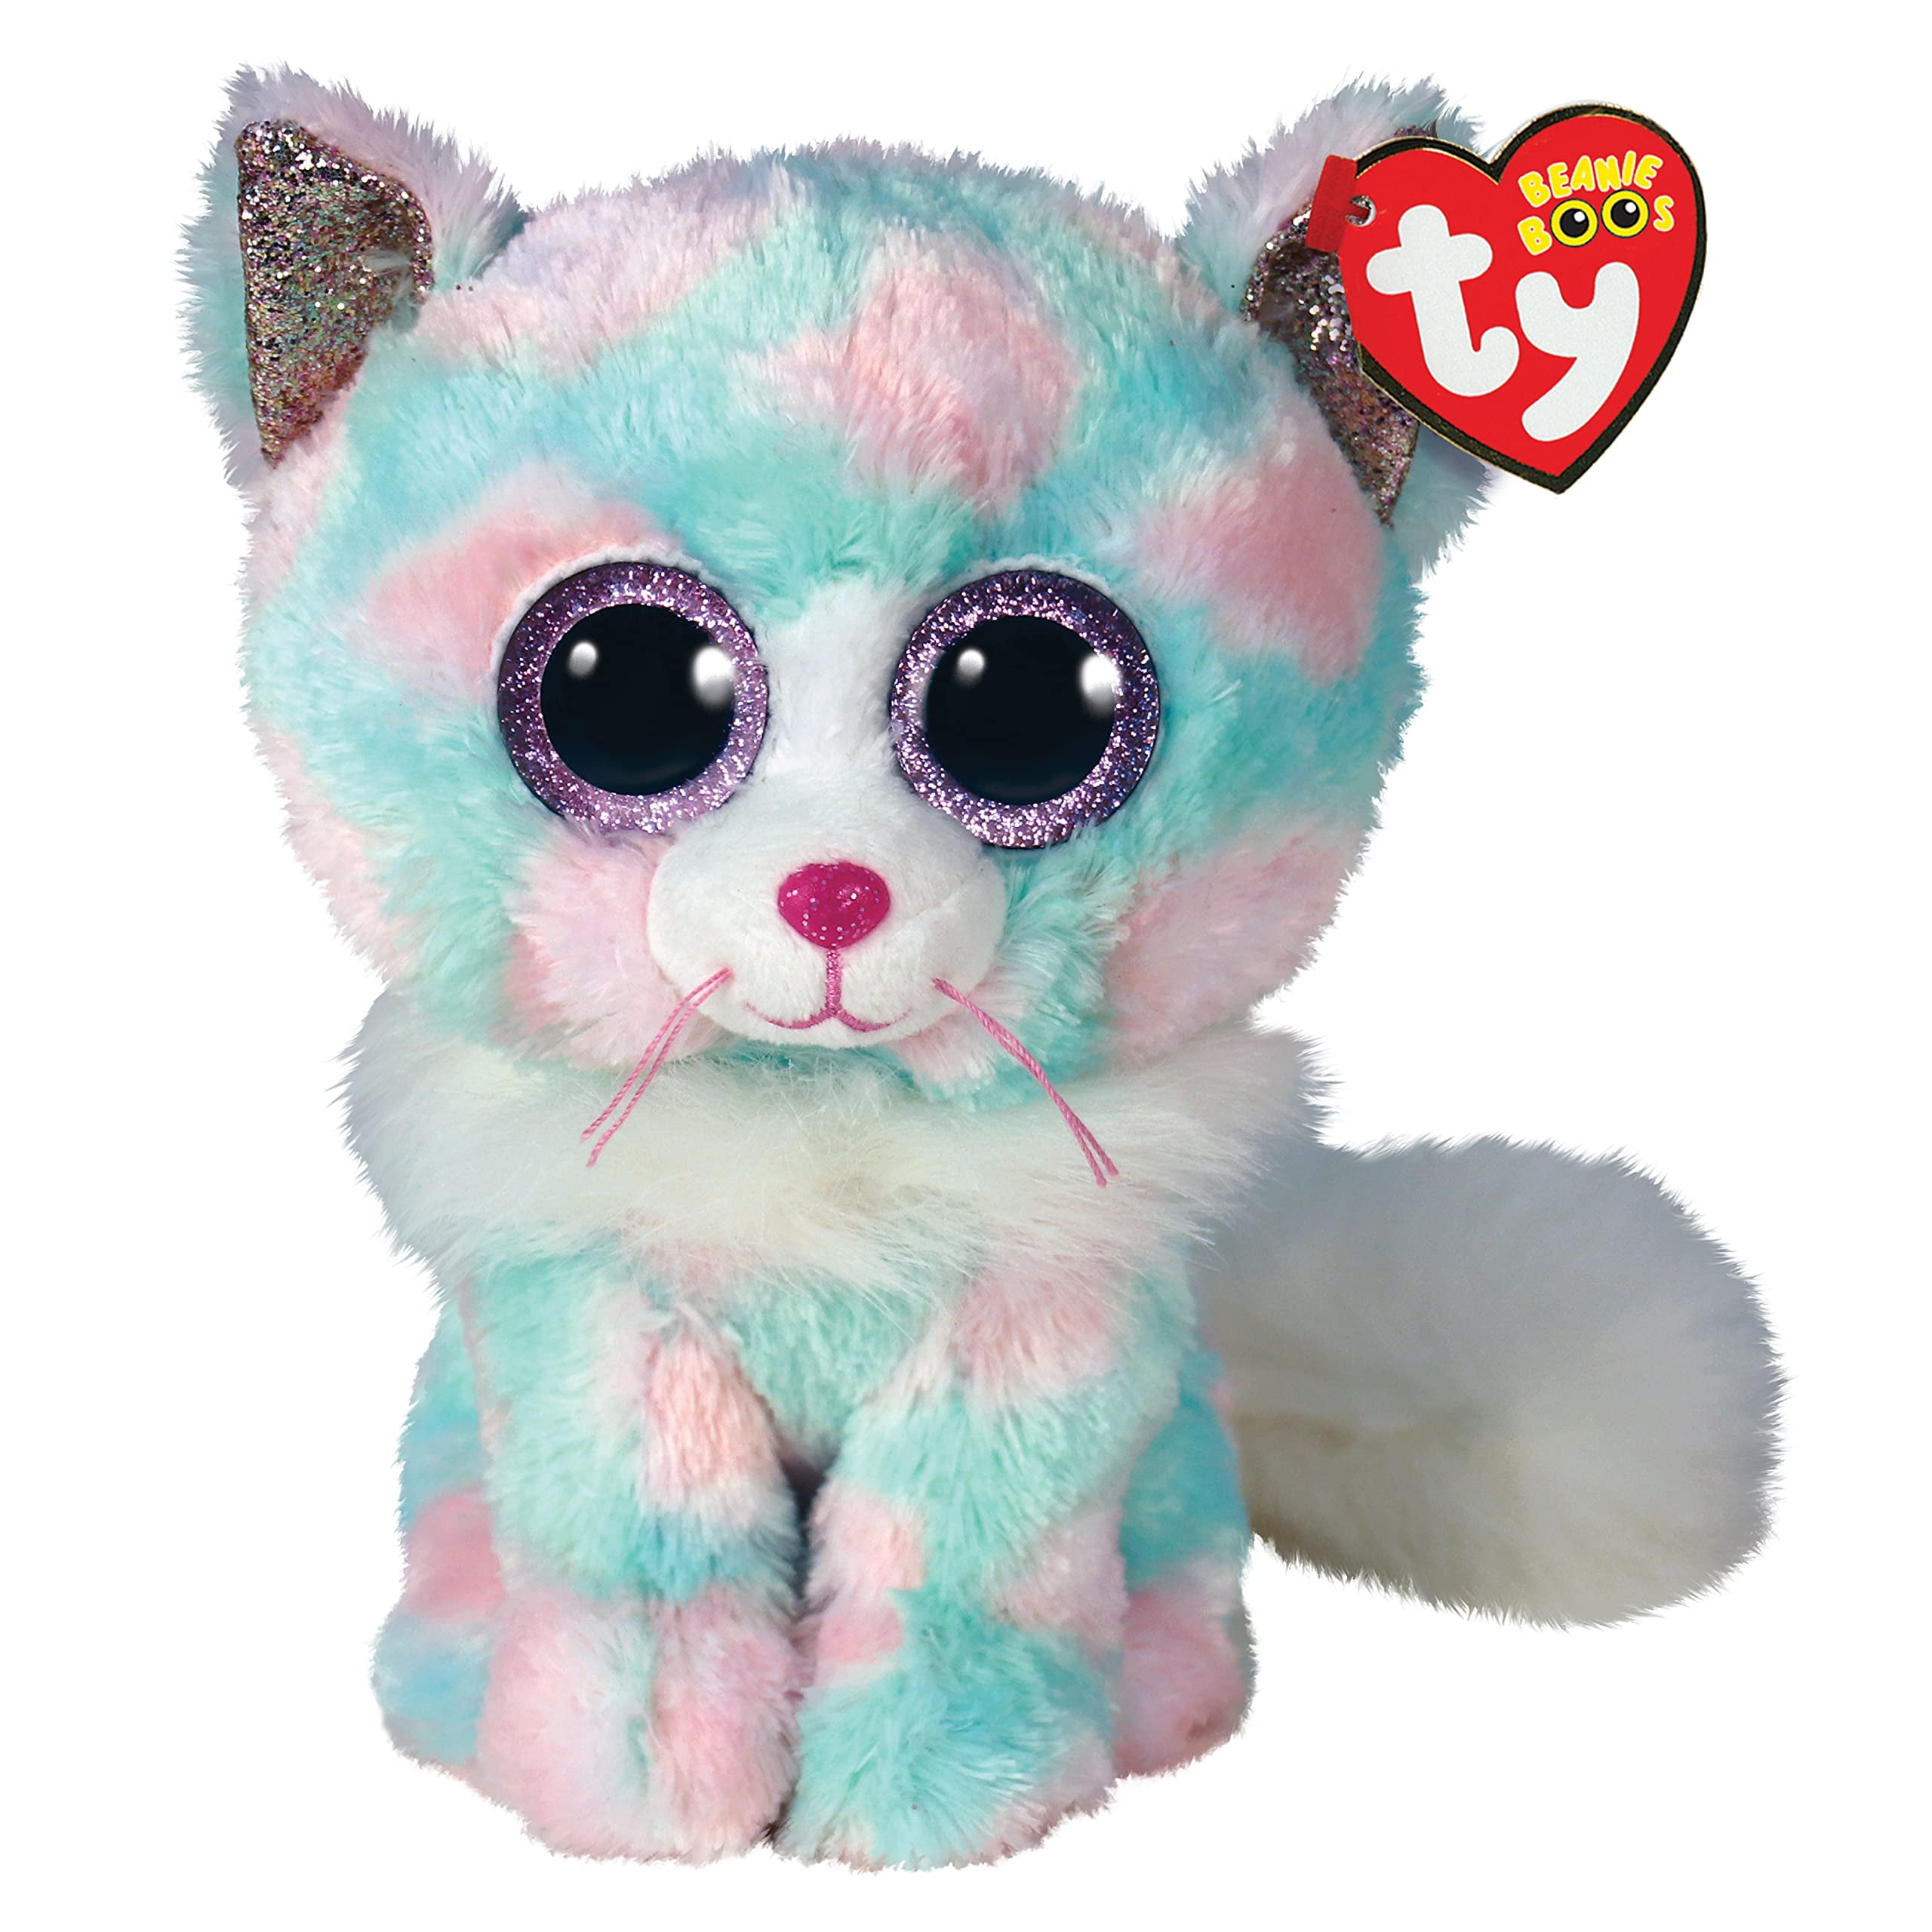 2018 TY Beanie Boos Mini Boo Series 3 Collectible Figure Muffin the Cat 2 INCH 